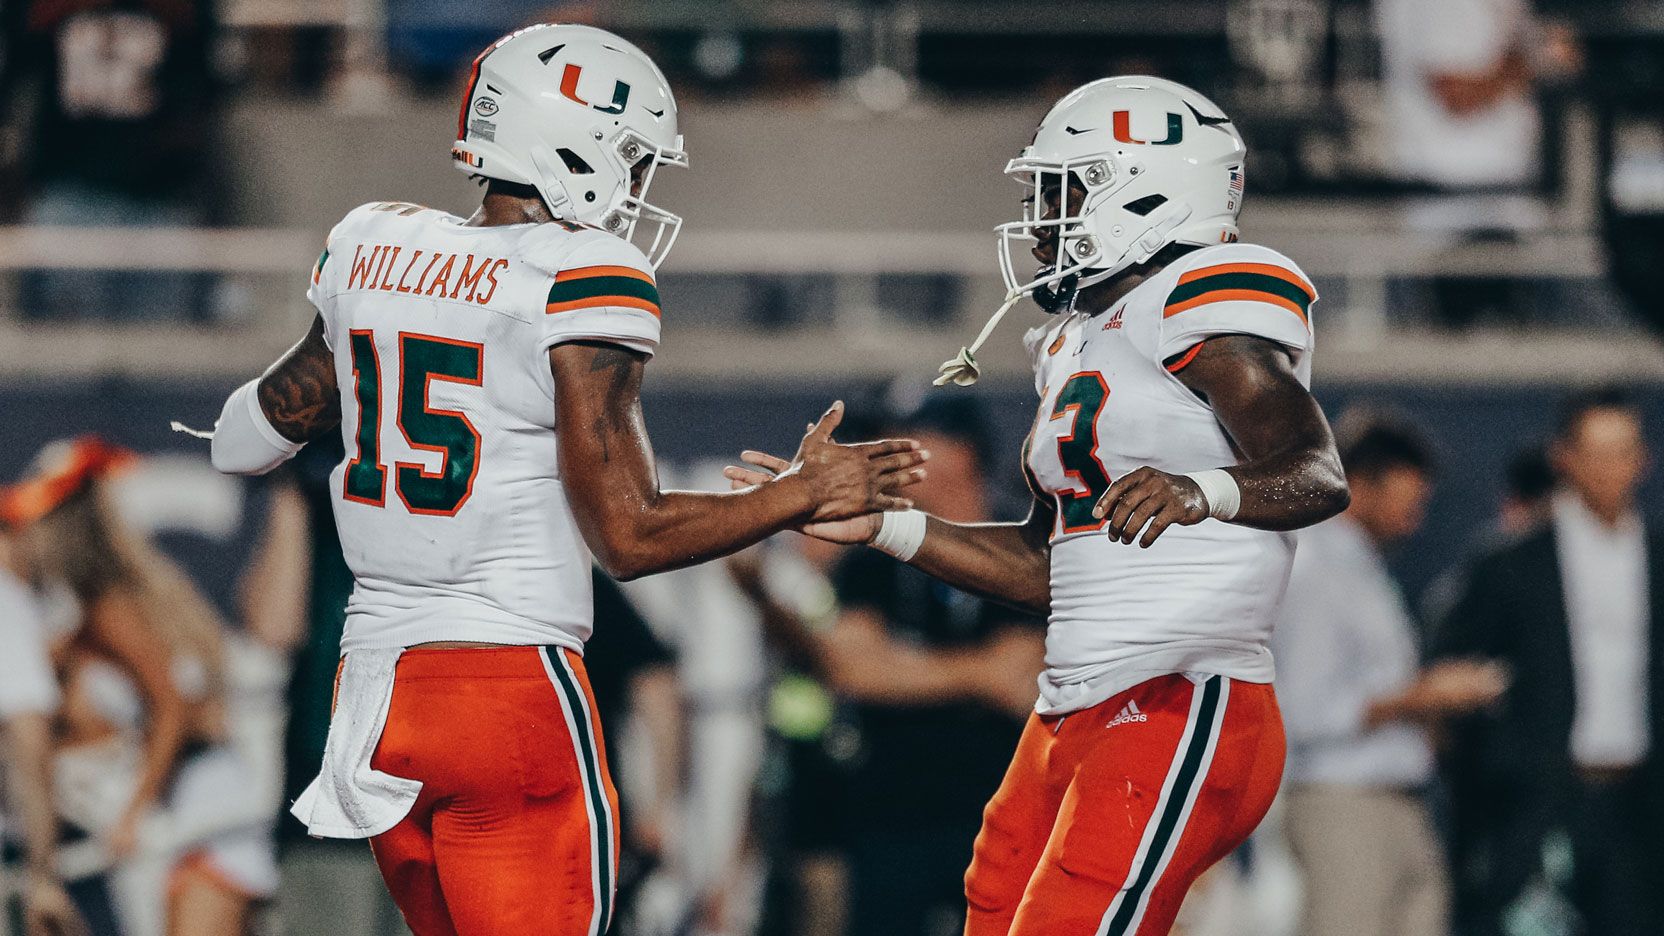 Canes QB Williams Determined to Learn from First Start